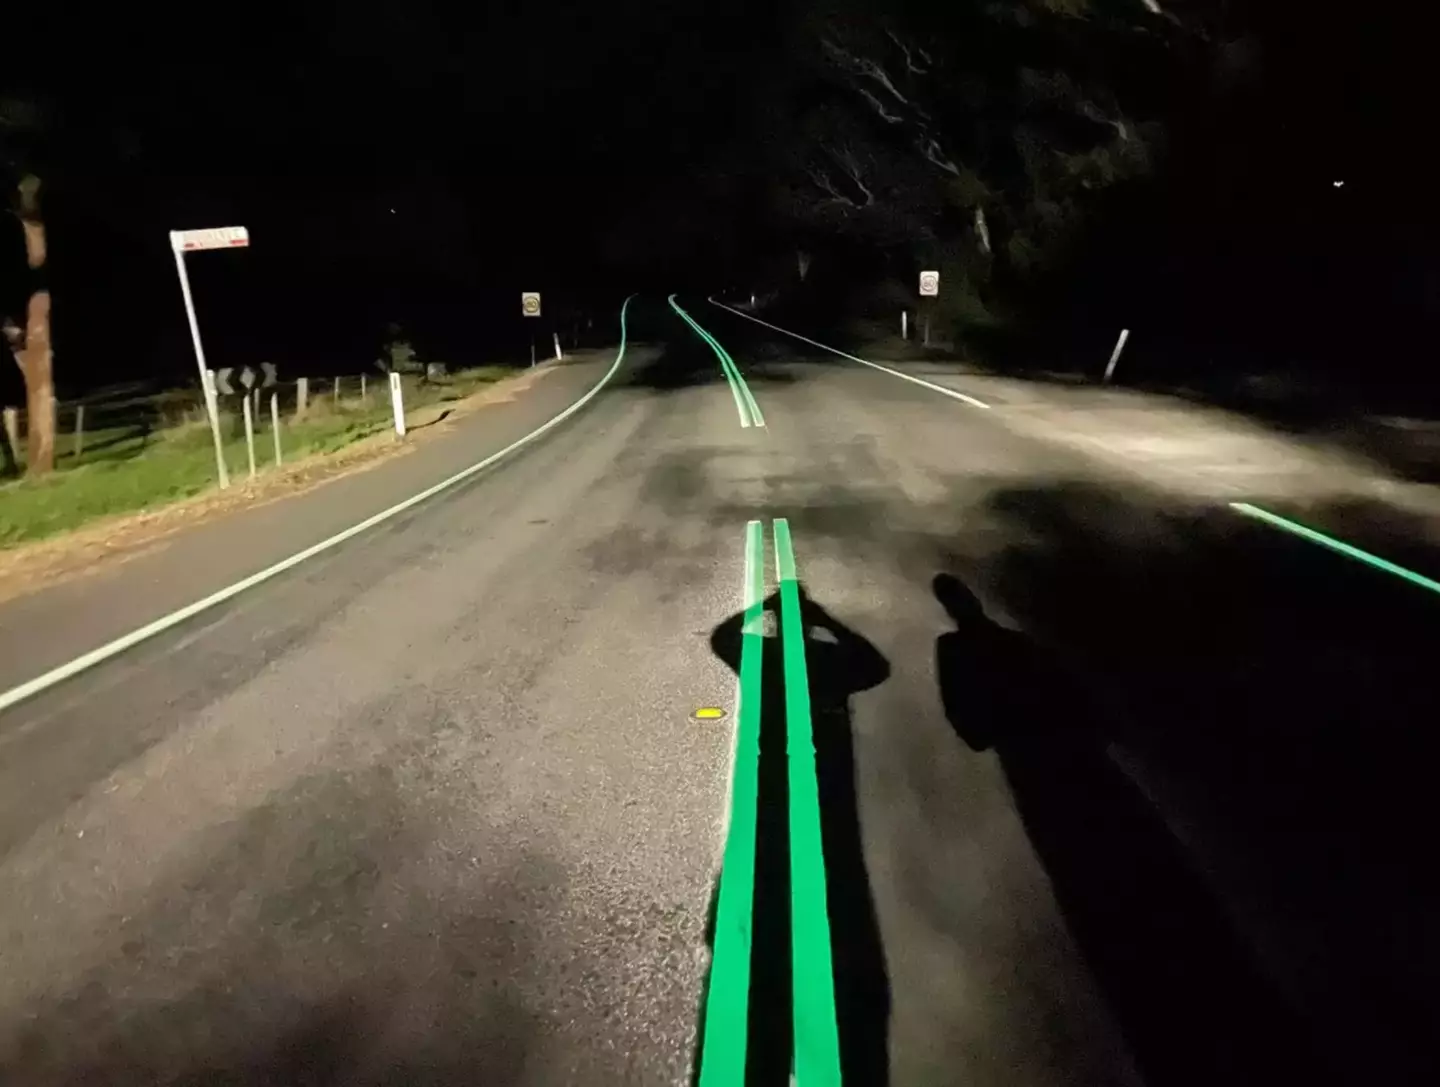 This is definitely a game-changer for motorists at night!